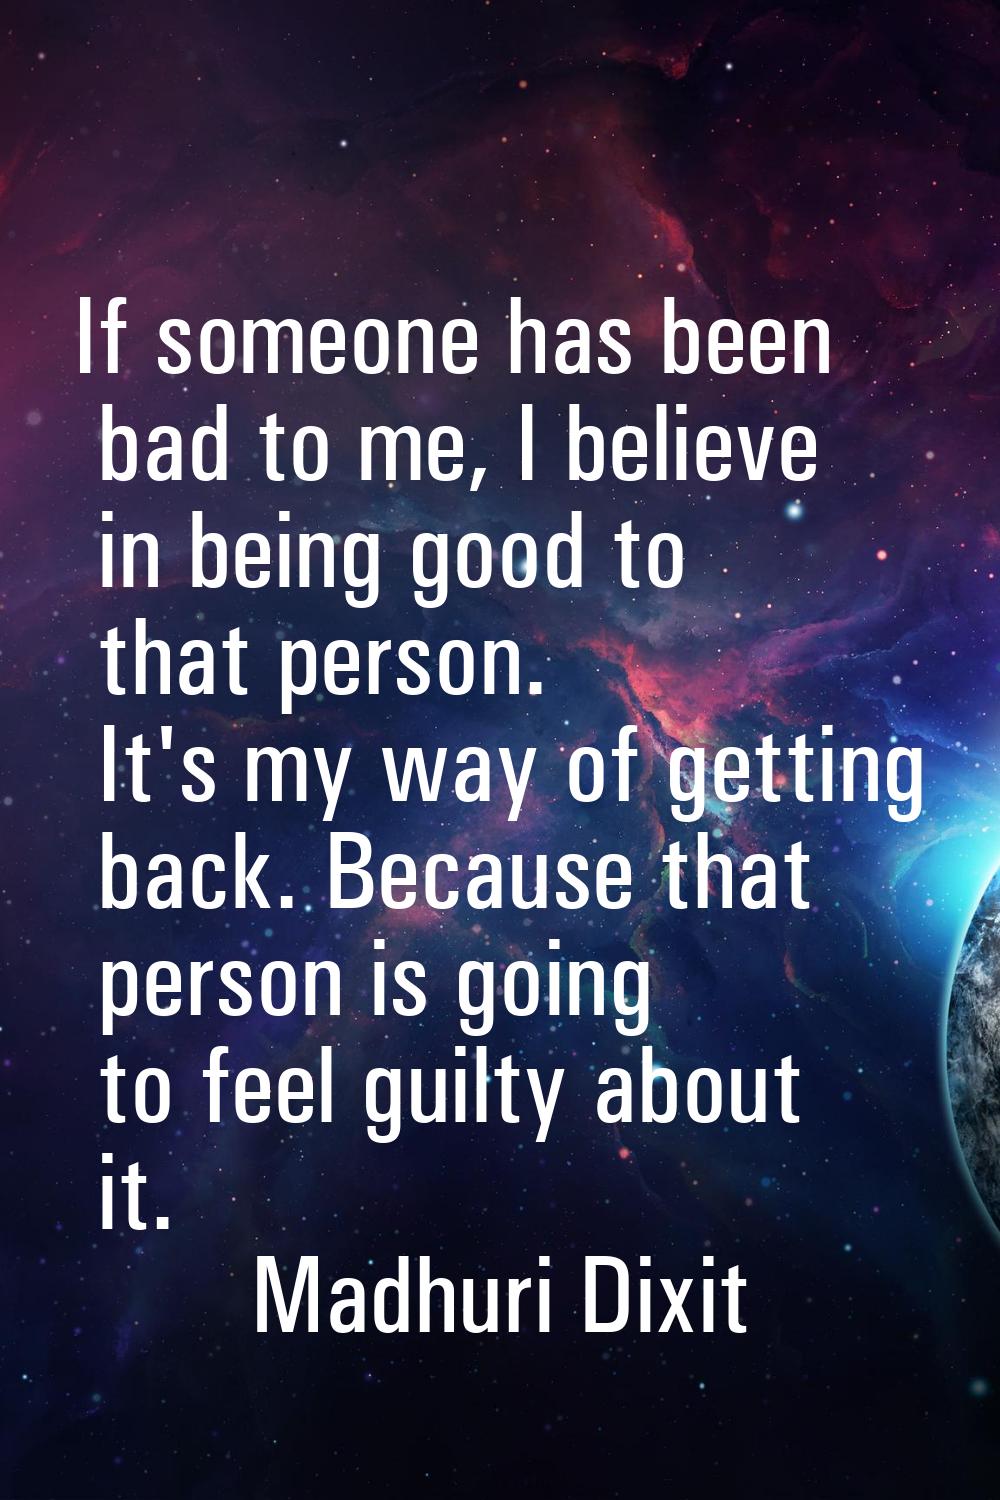 If someone has been bad to me, I believe in being good to that person. It's my way of getting back.